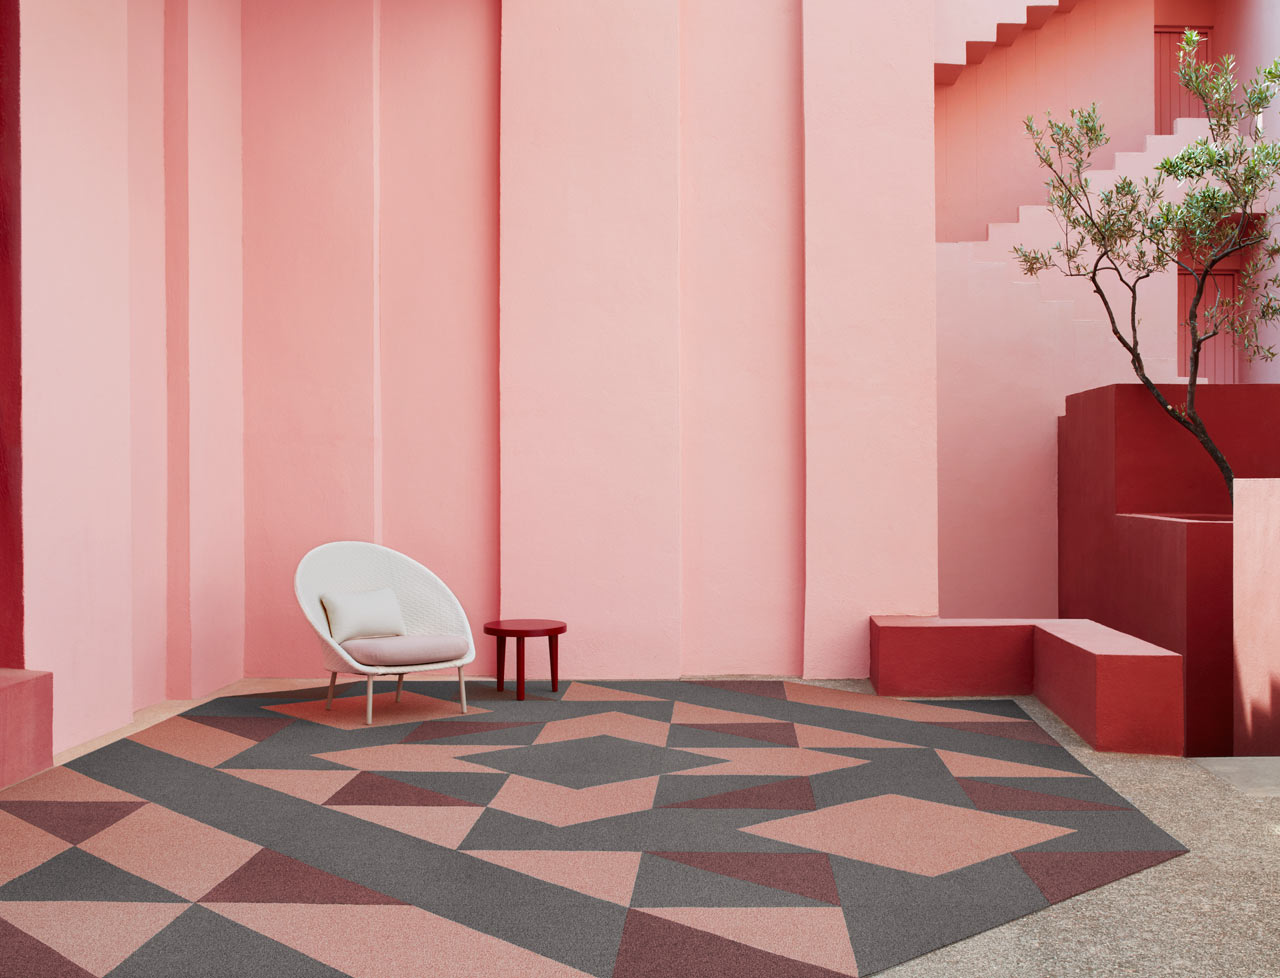 Form Us With Love X Shaw Contract = Inside Shapes Modular Flooring